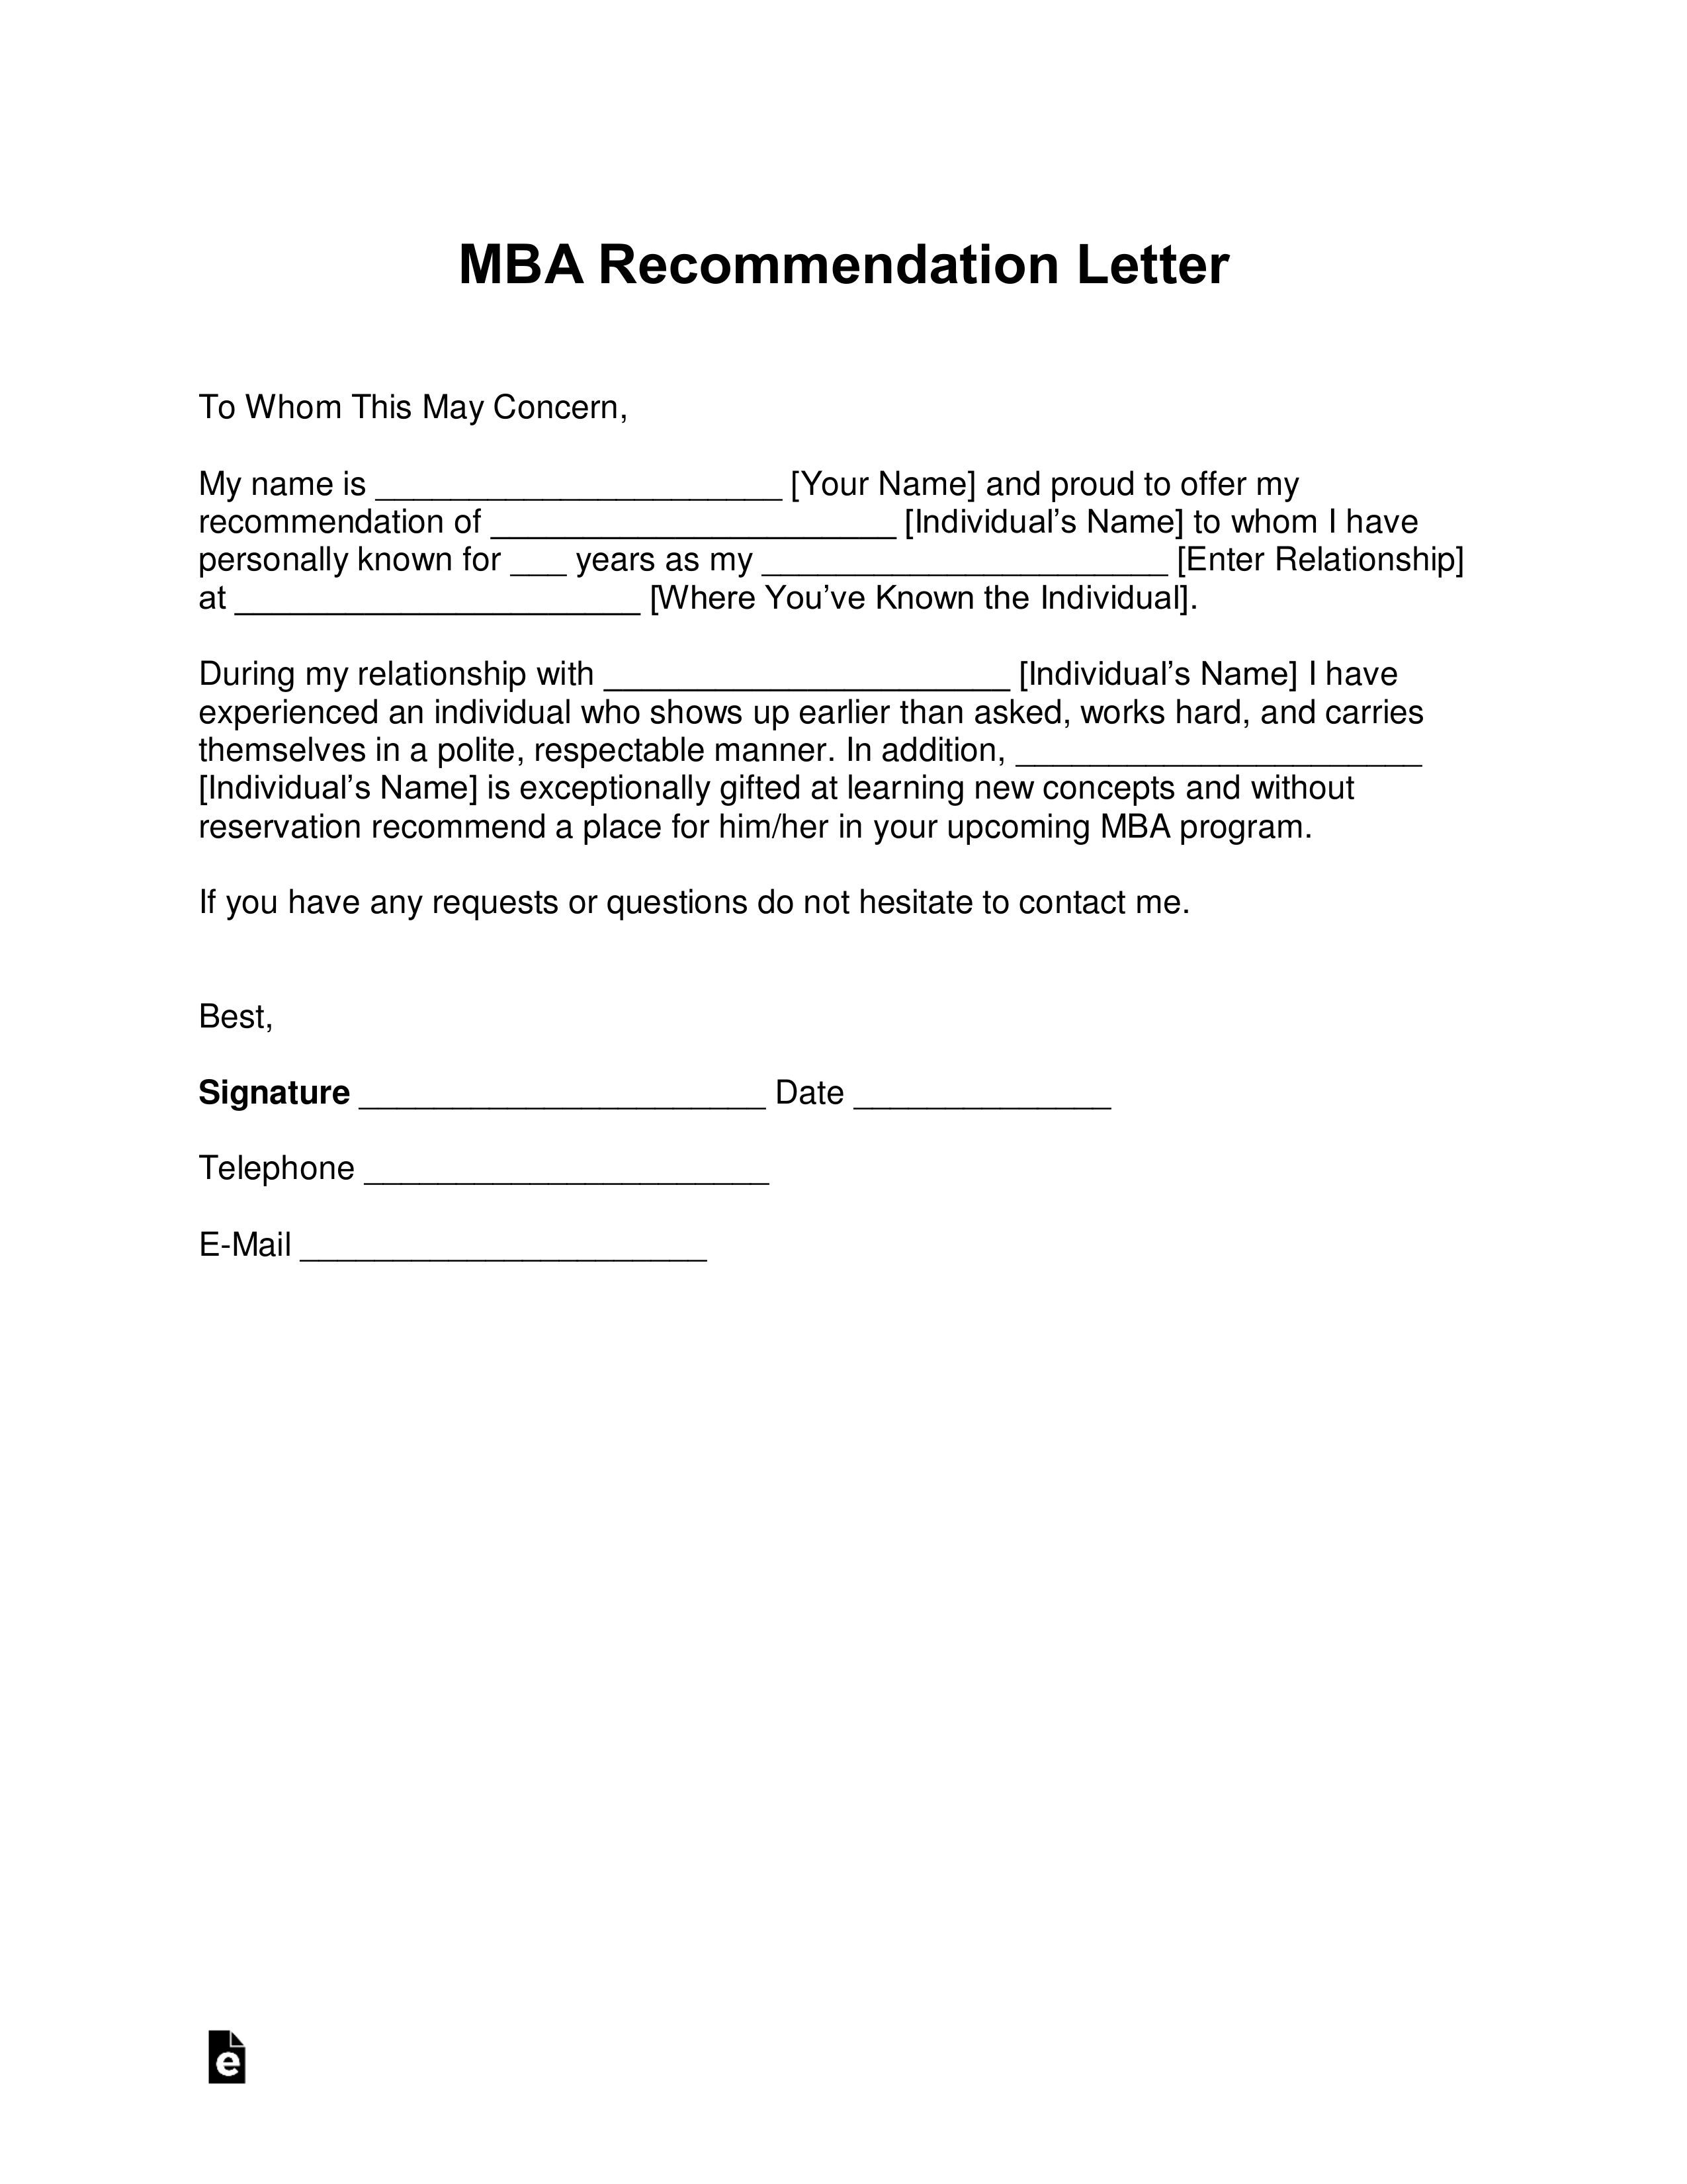 Letter Of Recommendation For A Coworker from eforms.com